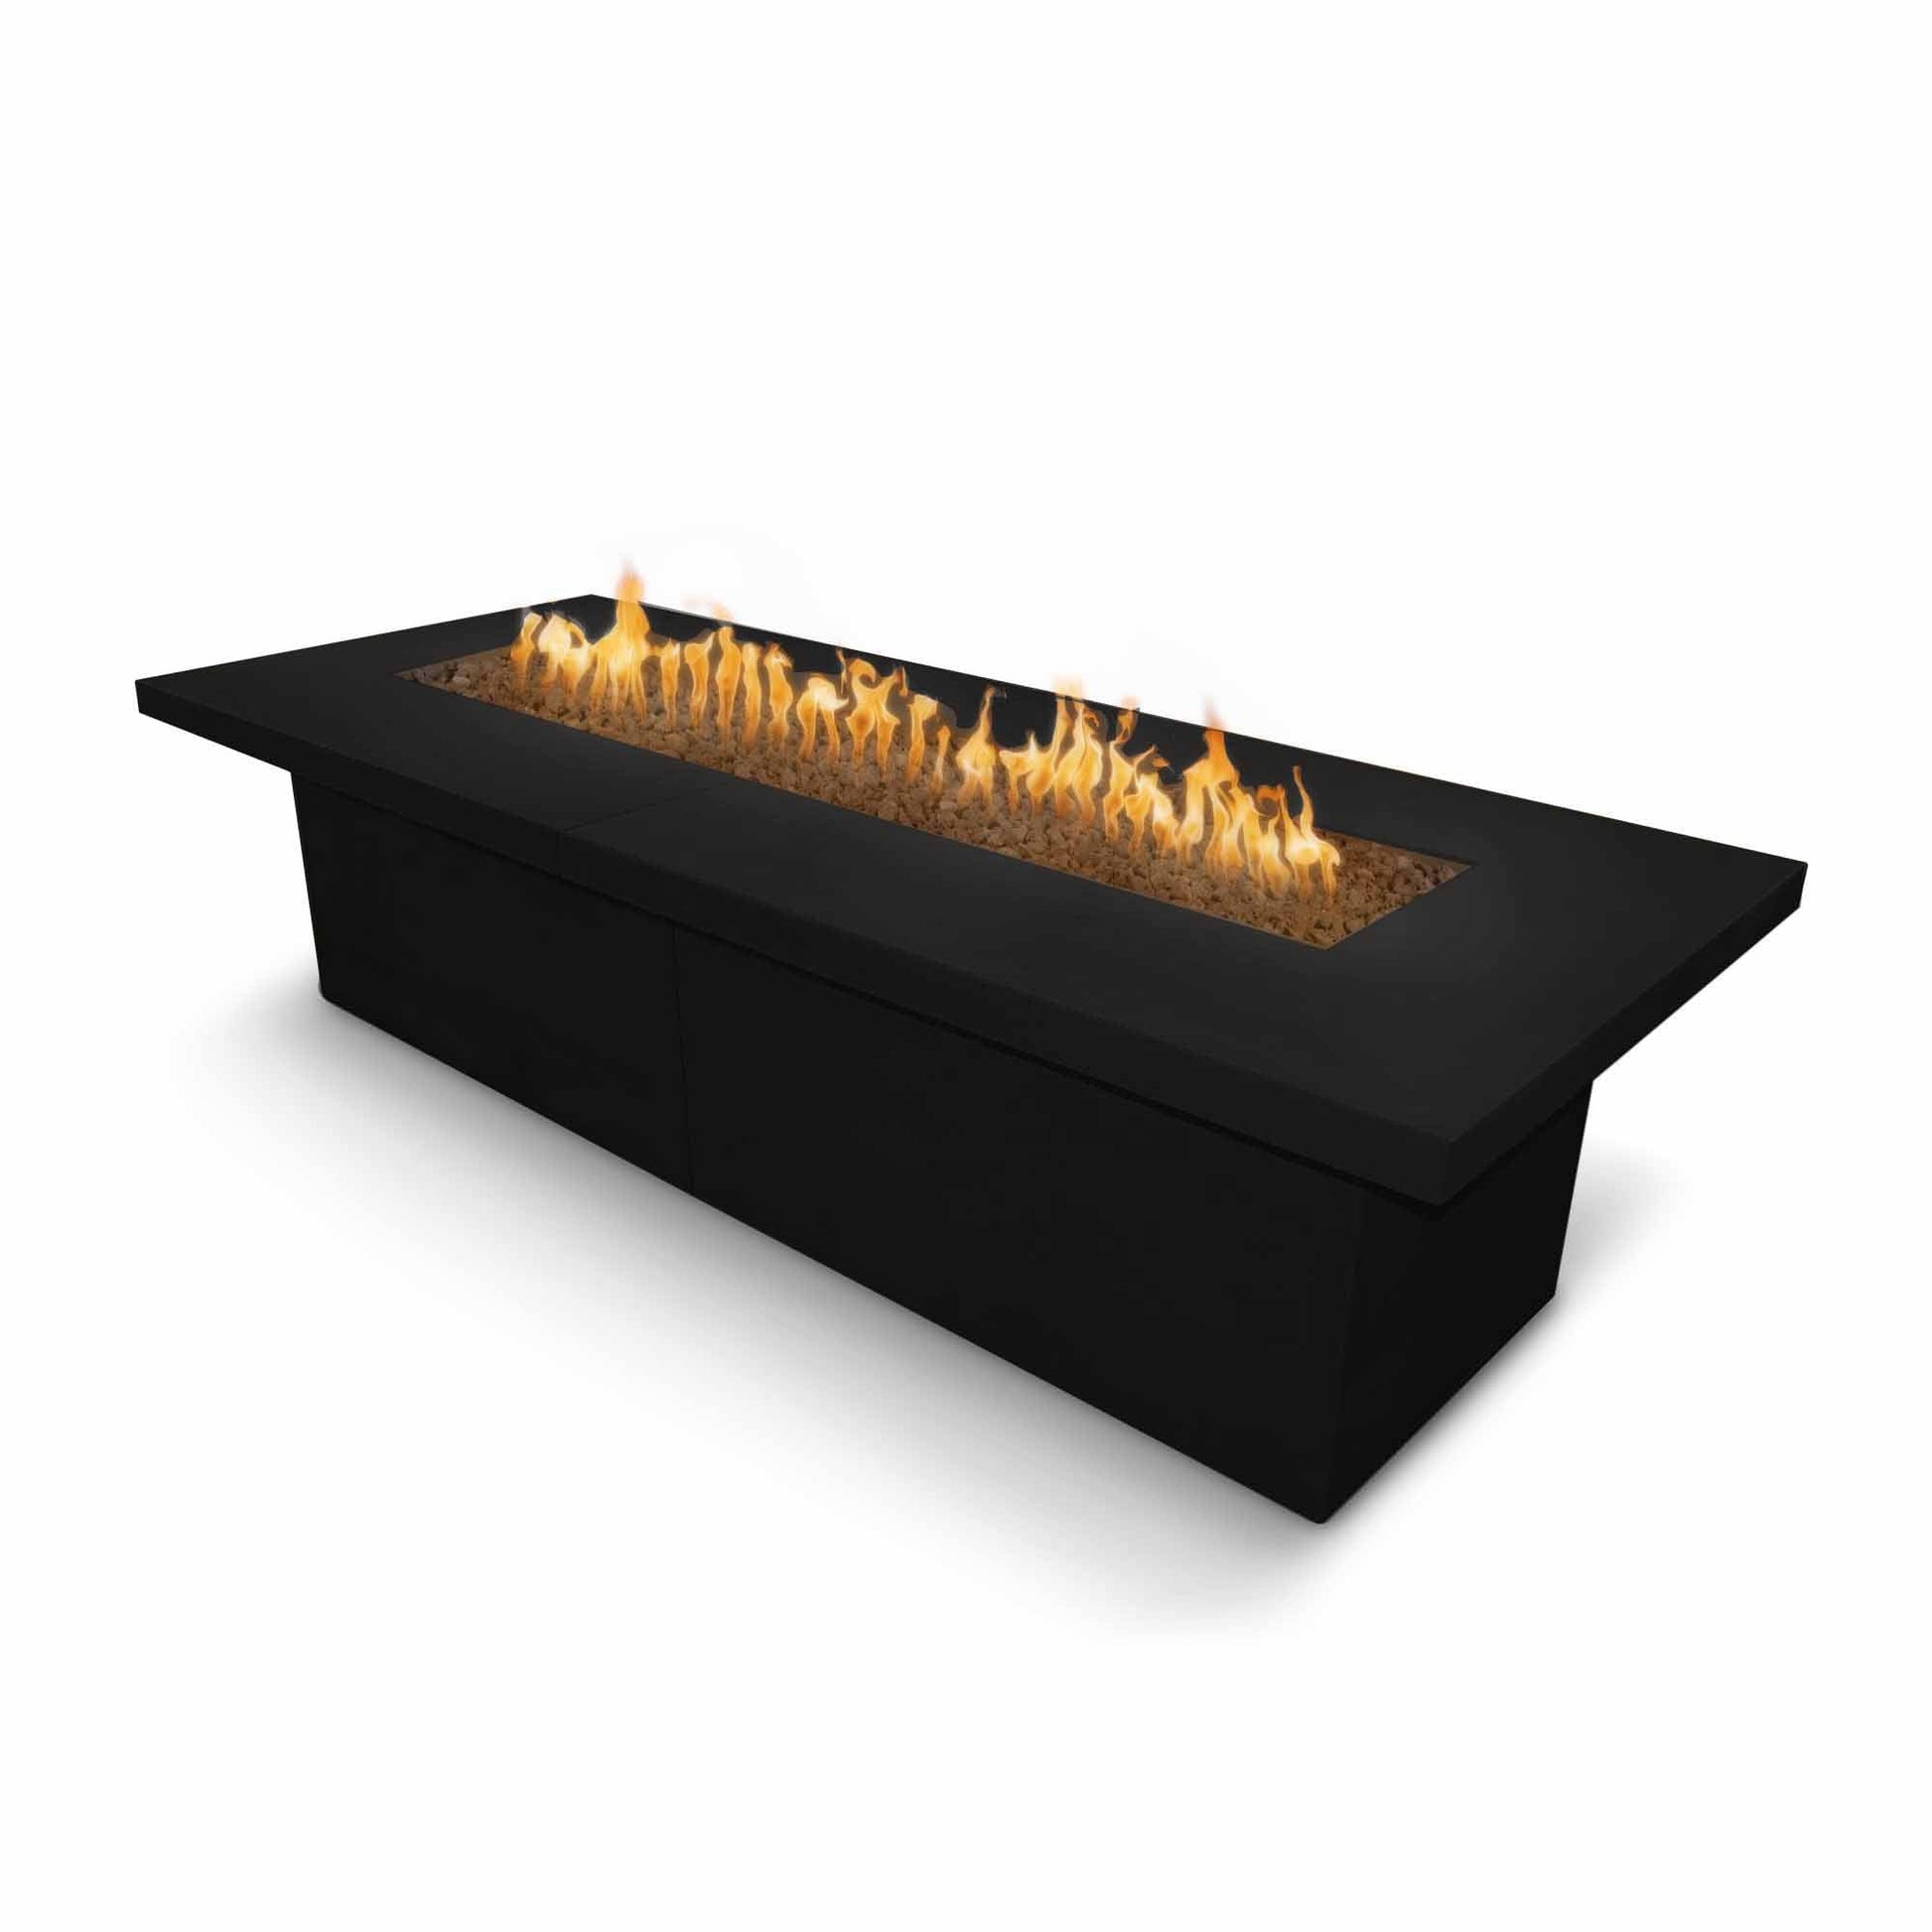 The Outdoor Plus Rectangular Newport 144" Copper Vein Powder Coated Metal Liquid Propane Fire Pit with Match Lit Ignition